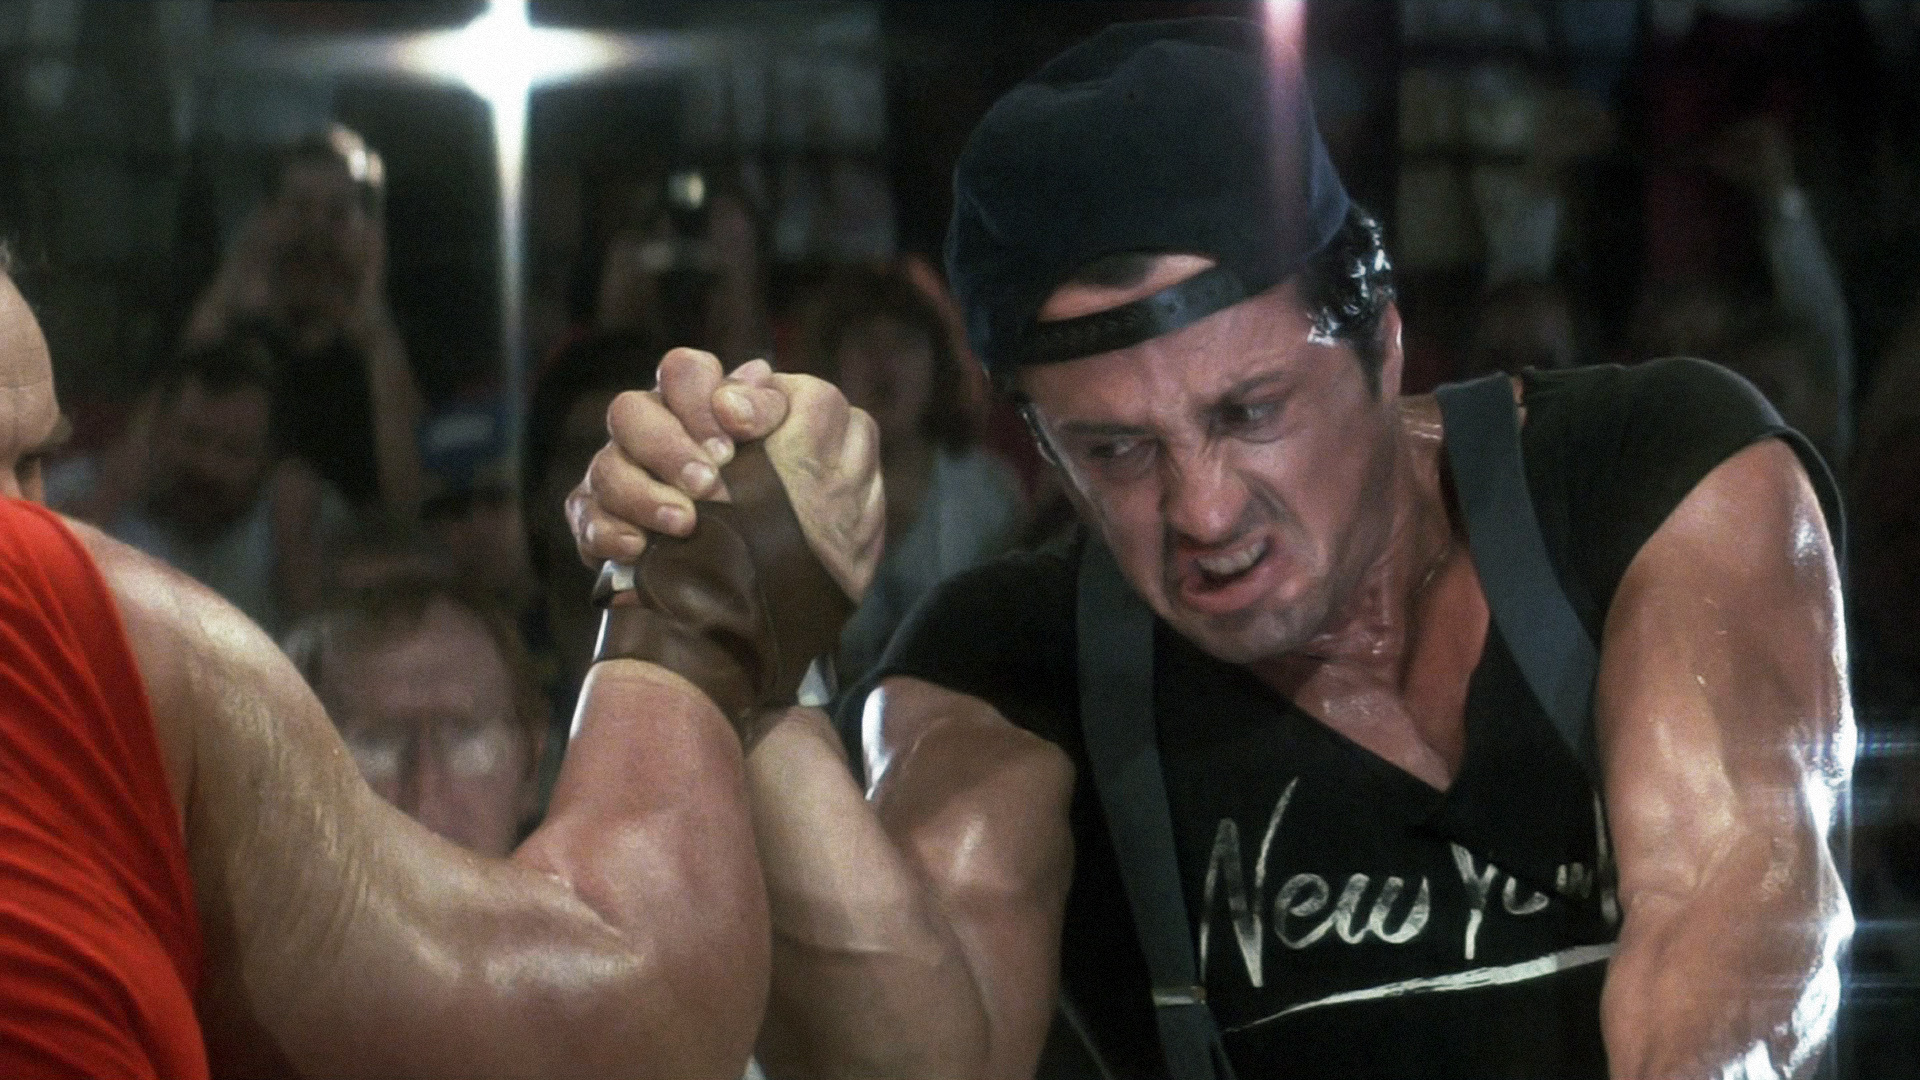 Arm Wrestling: Over The Top 1987 Movie, Sylvester Stallone, Final Match, Competitive Arm Wrestling. 1920x1080 Full HD Background.